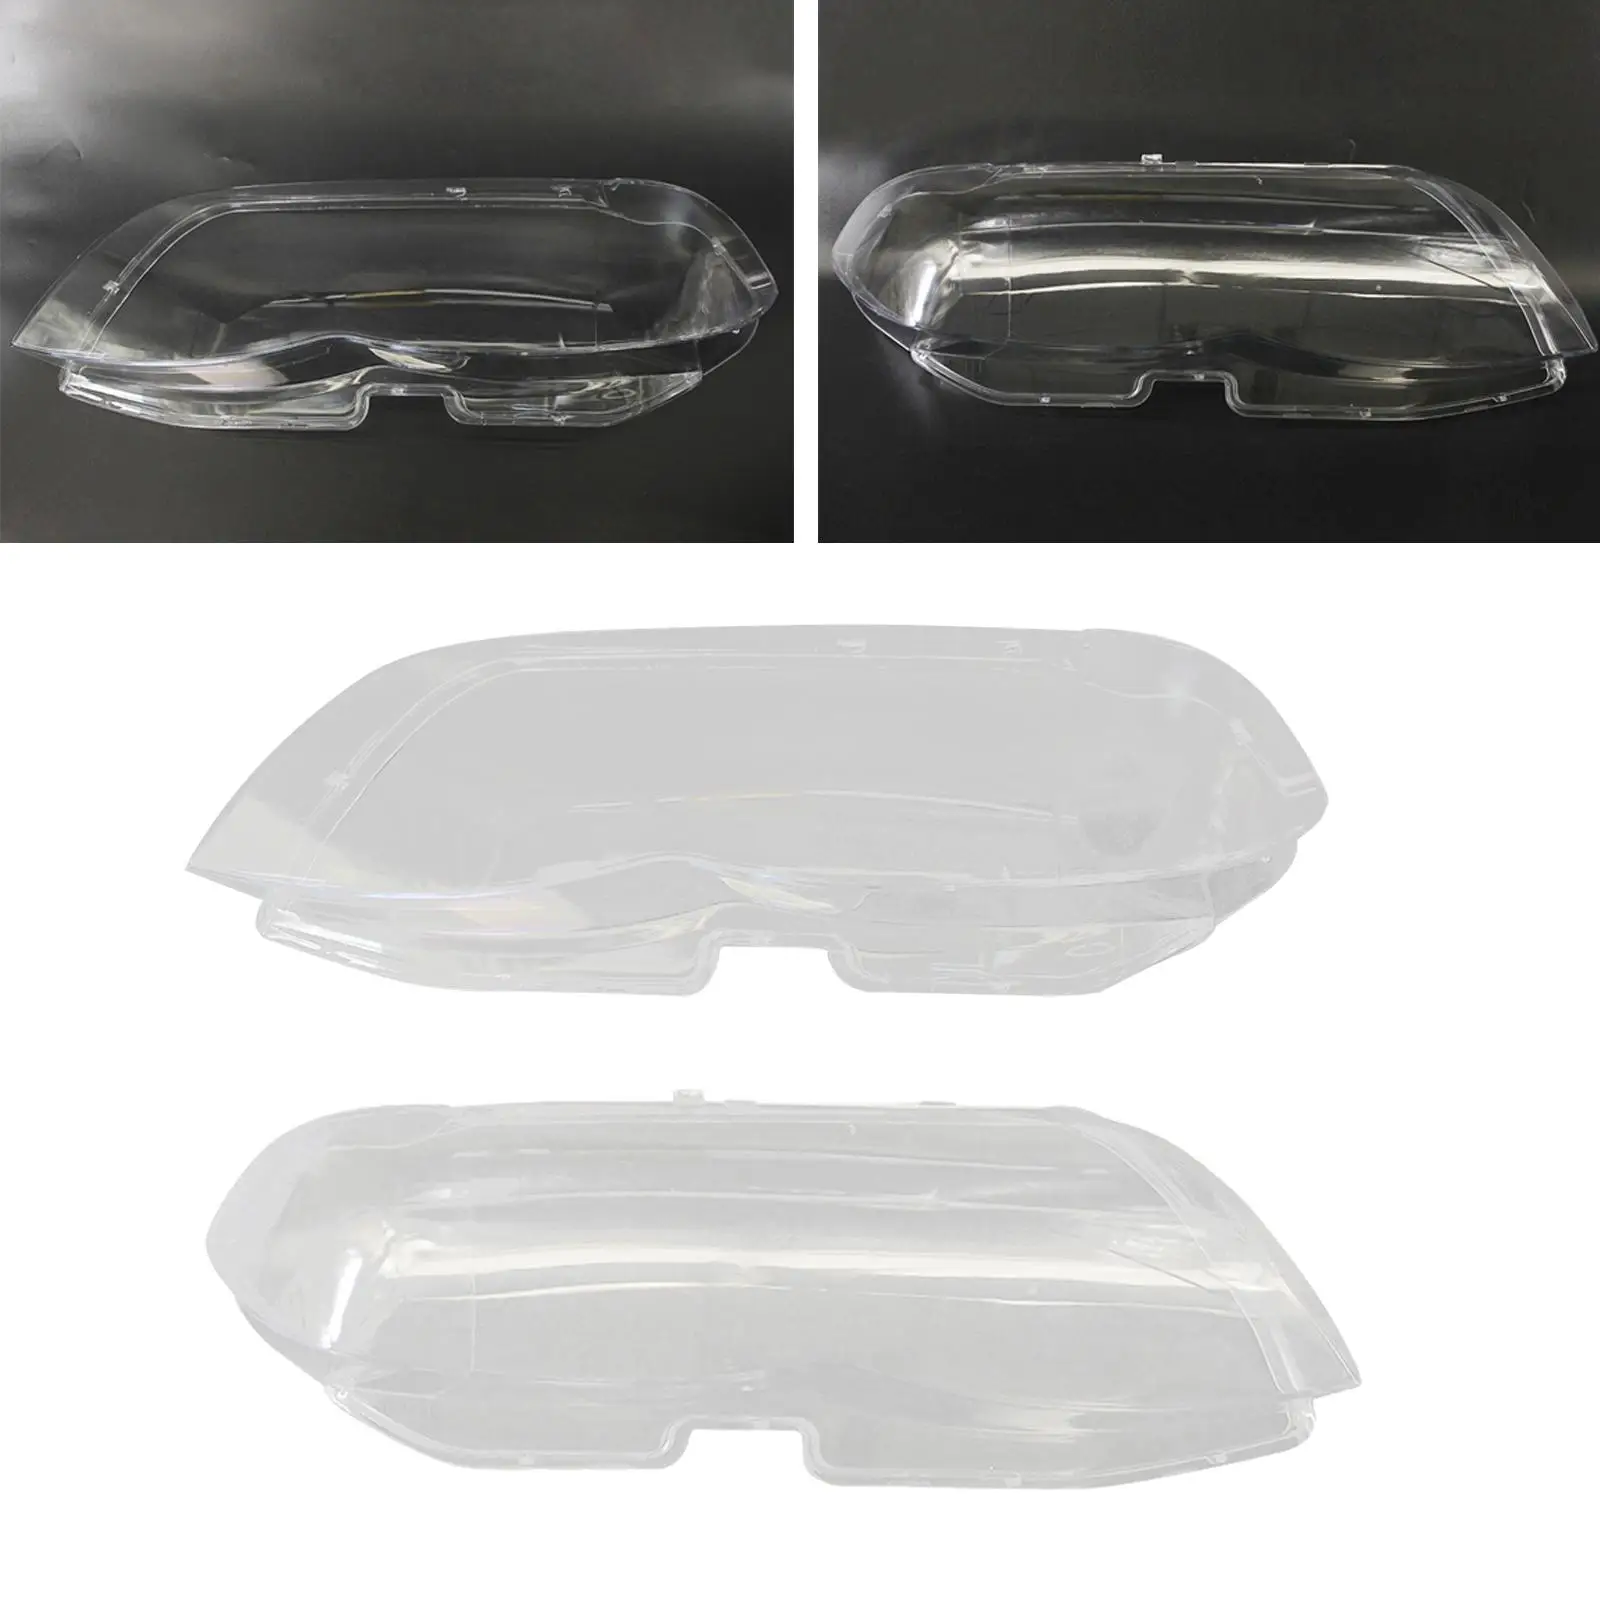 Car Front Headlight Lens Cover Replacements for BMW X5 E53 3.0 4.4 2004-2006